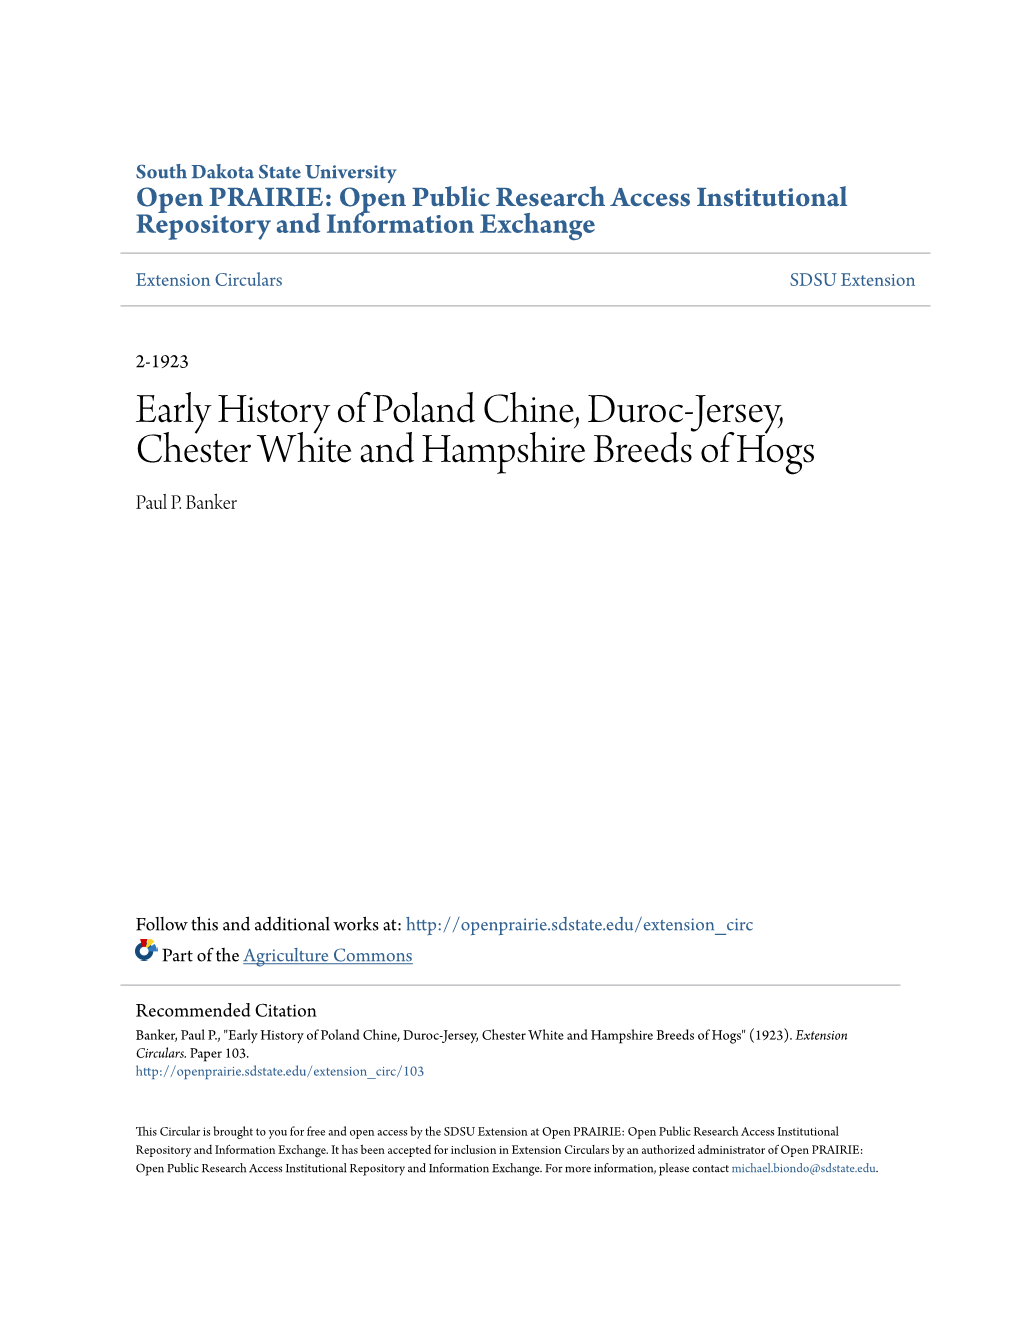 Early History of Poland Chine, Duroc-Jersey, Chester White and Hampshire Breeds of Hogs Paul P